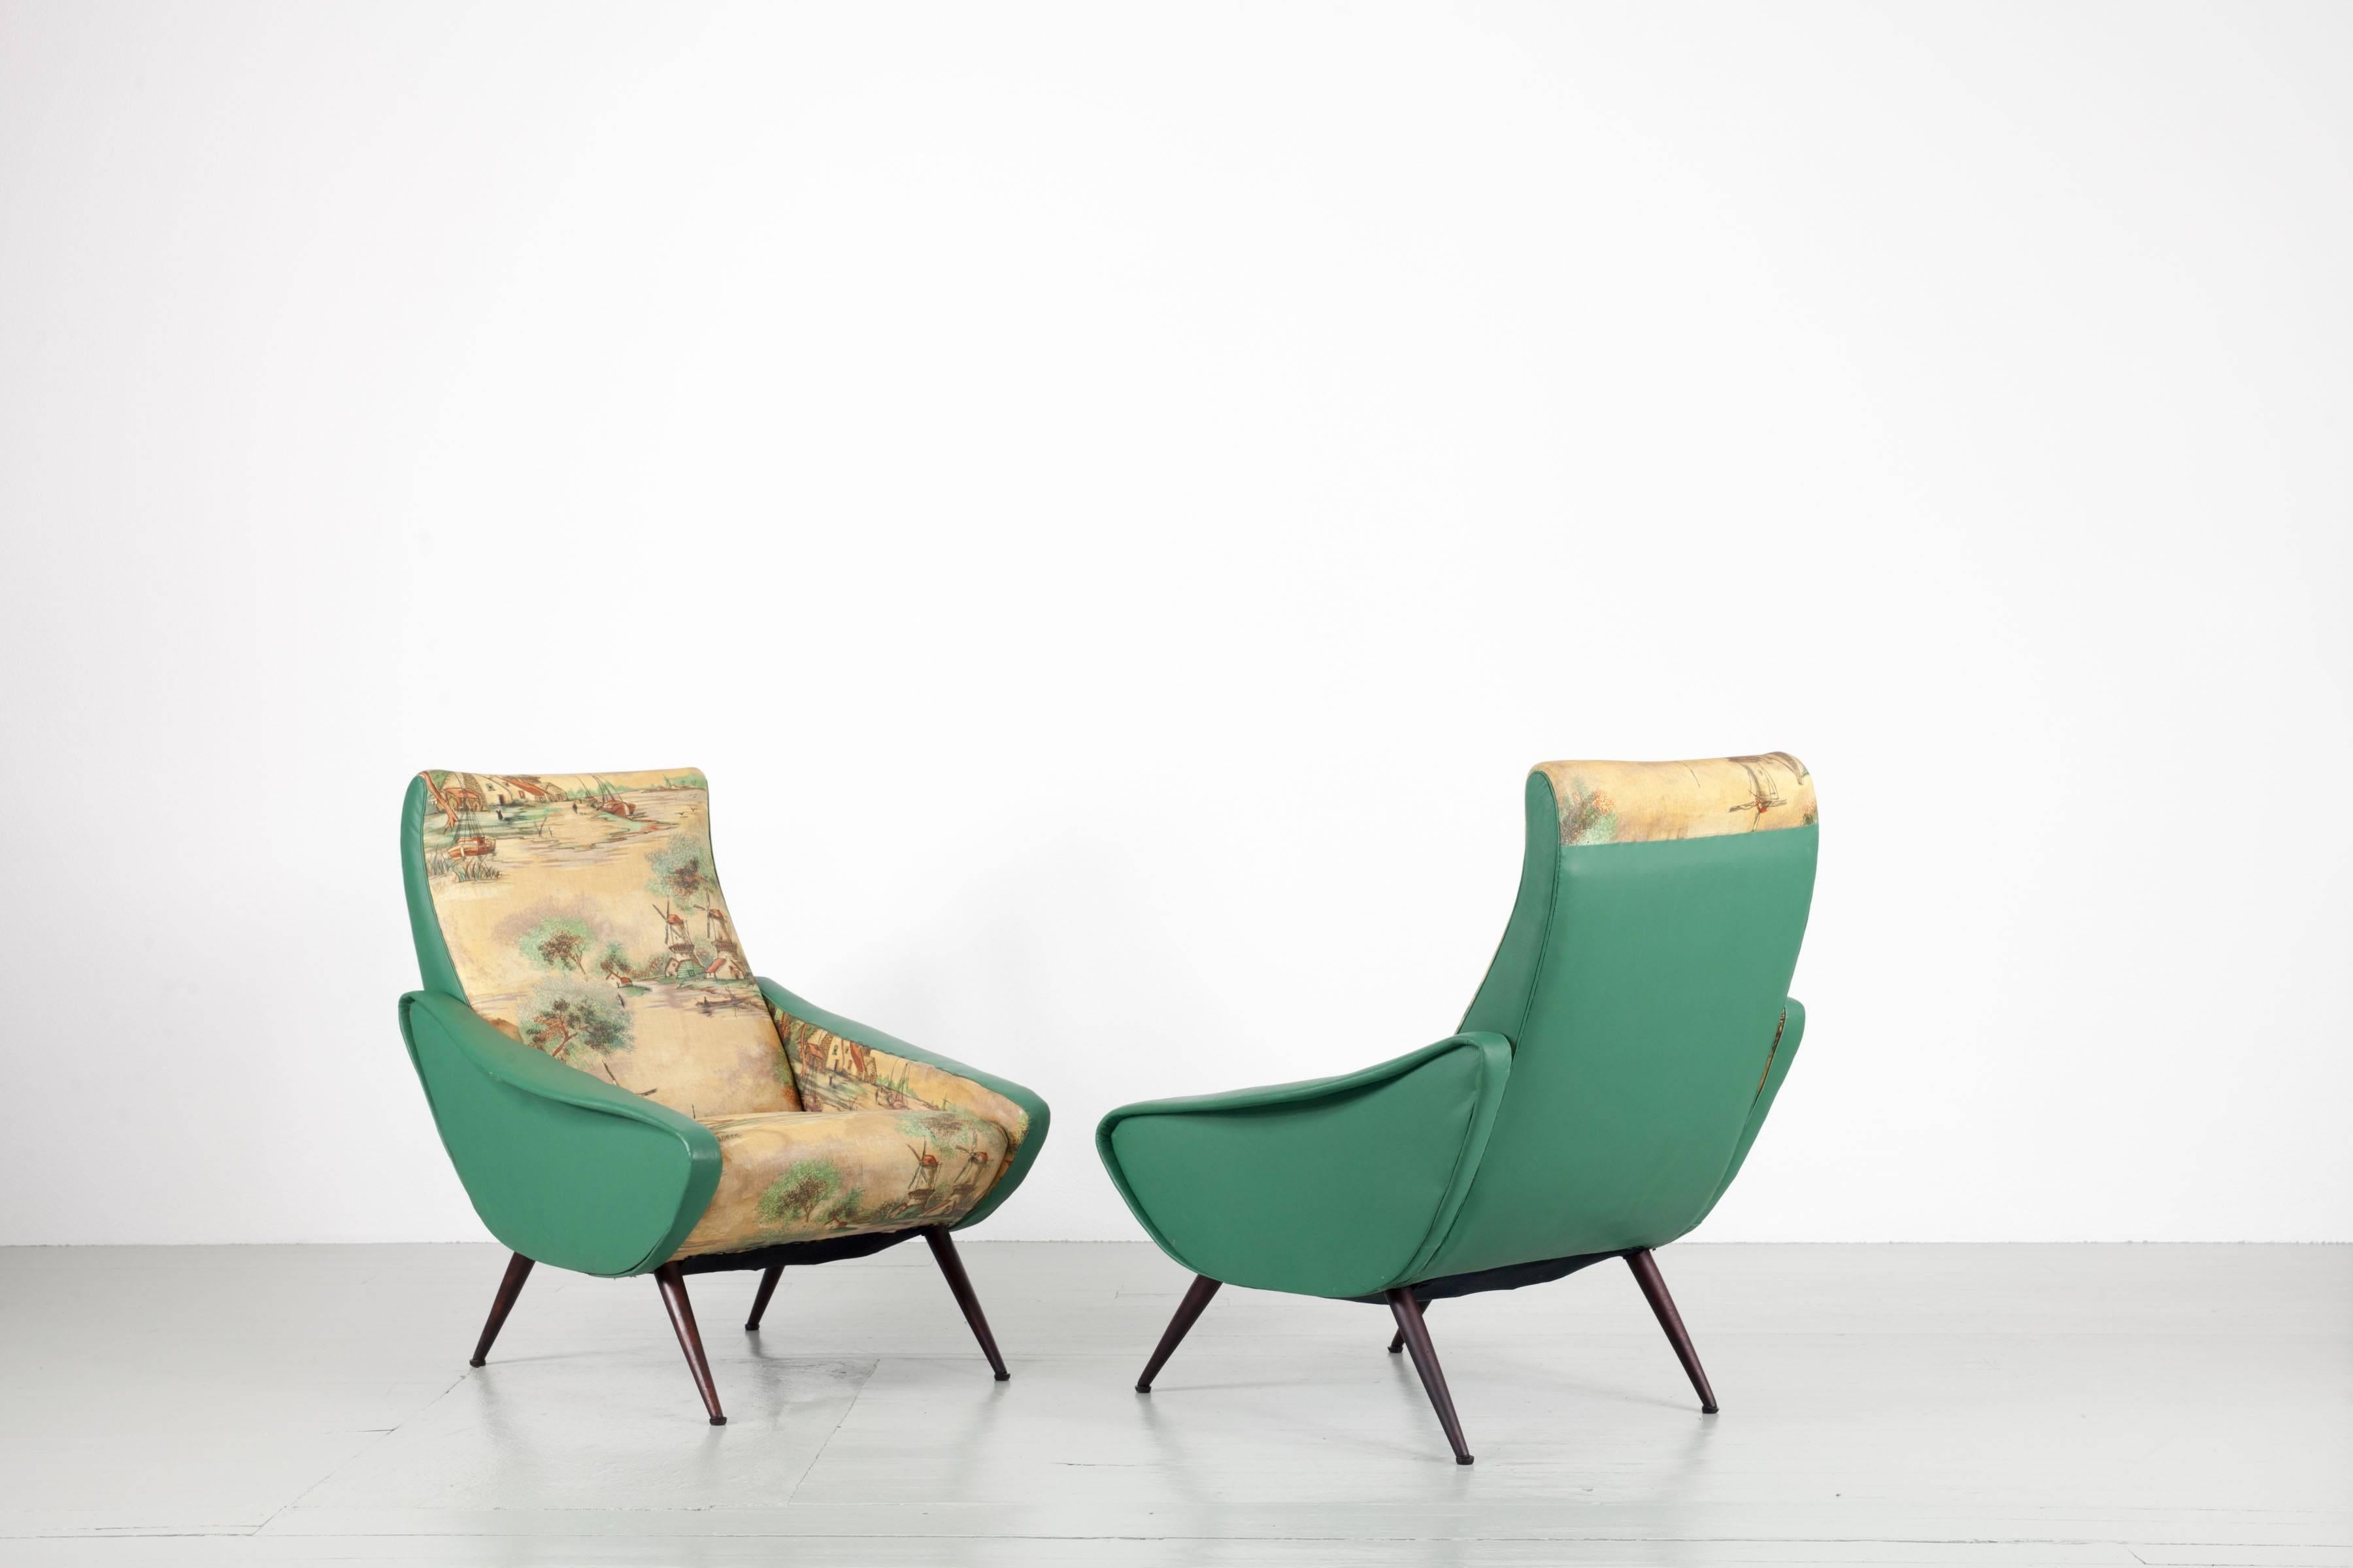 Set of 2 Italian Chairs, Two-Tone Cover, Turquoise and Landscape Motive, 1950s For Sale 6